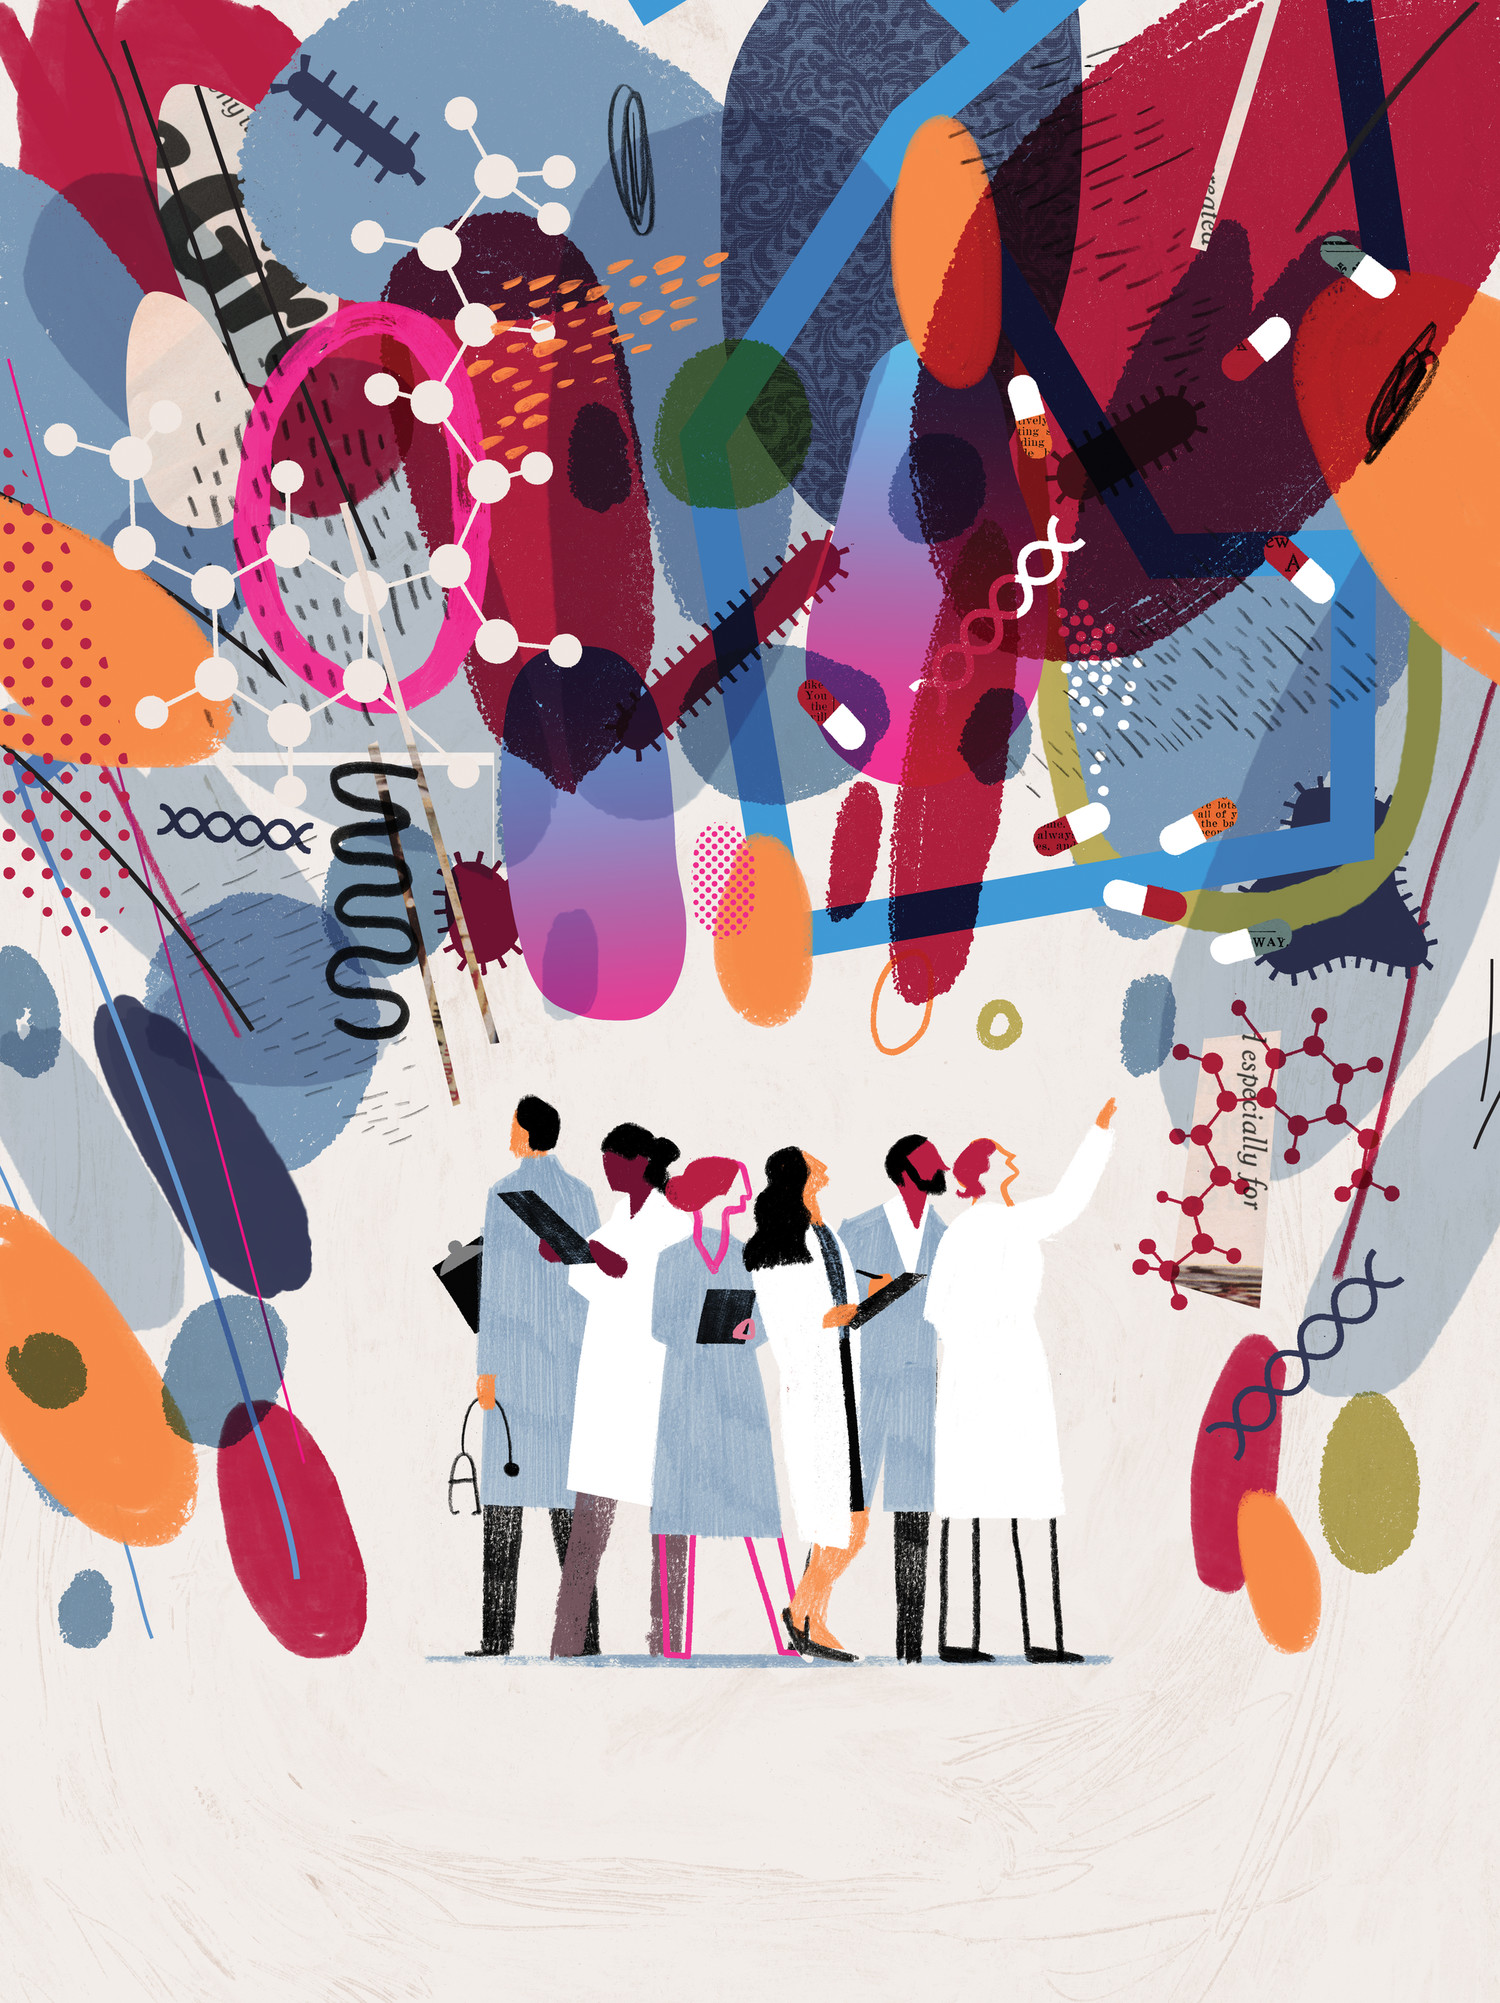 Abstract image of medical people